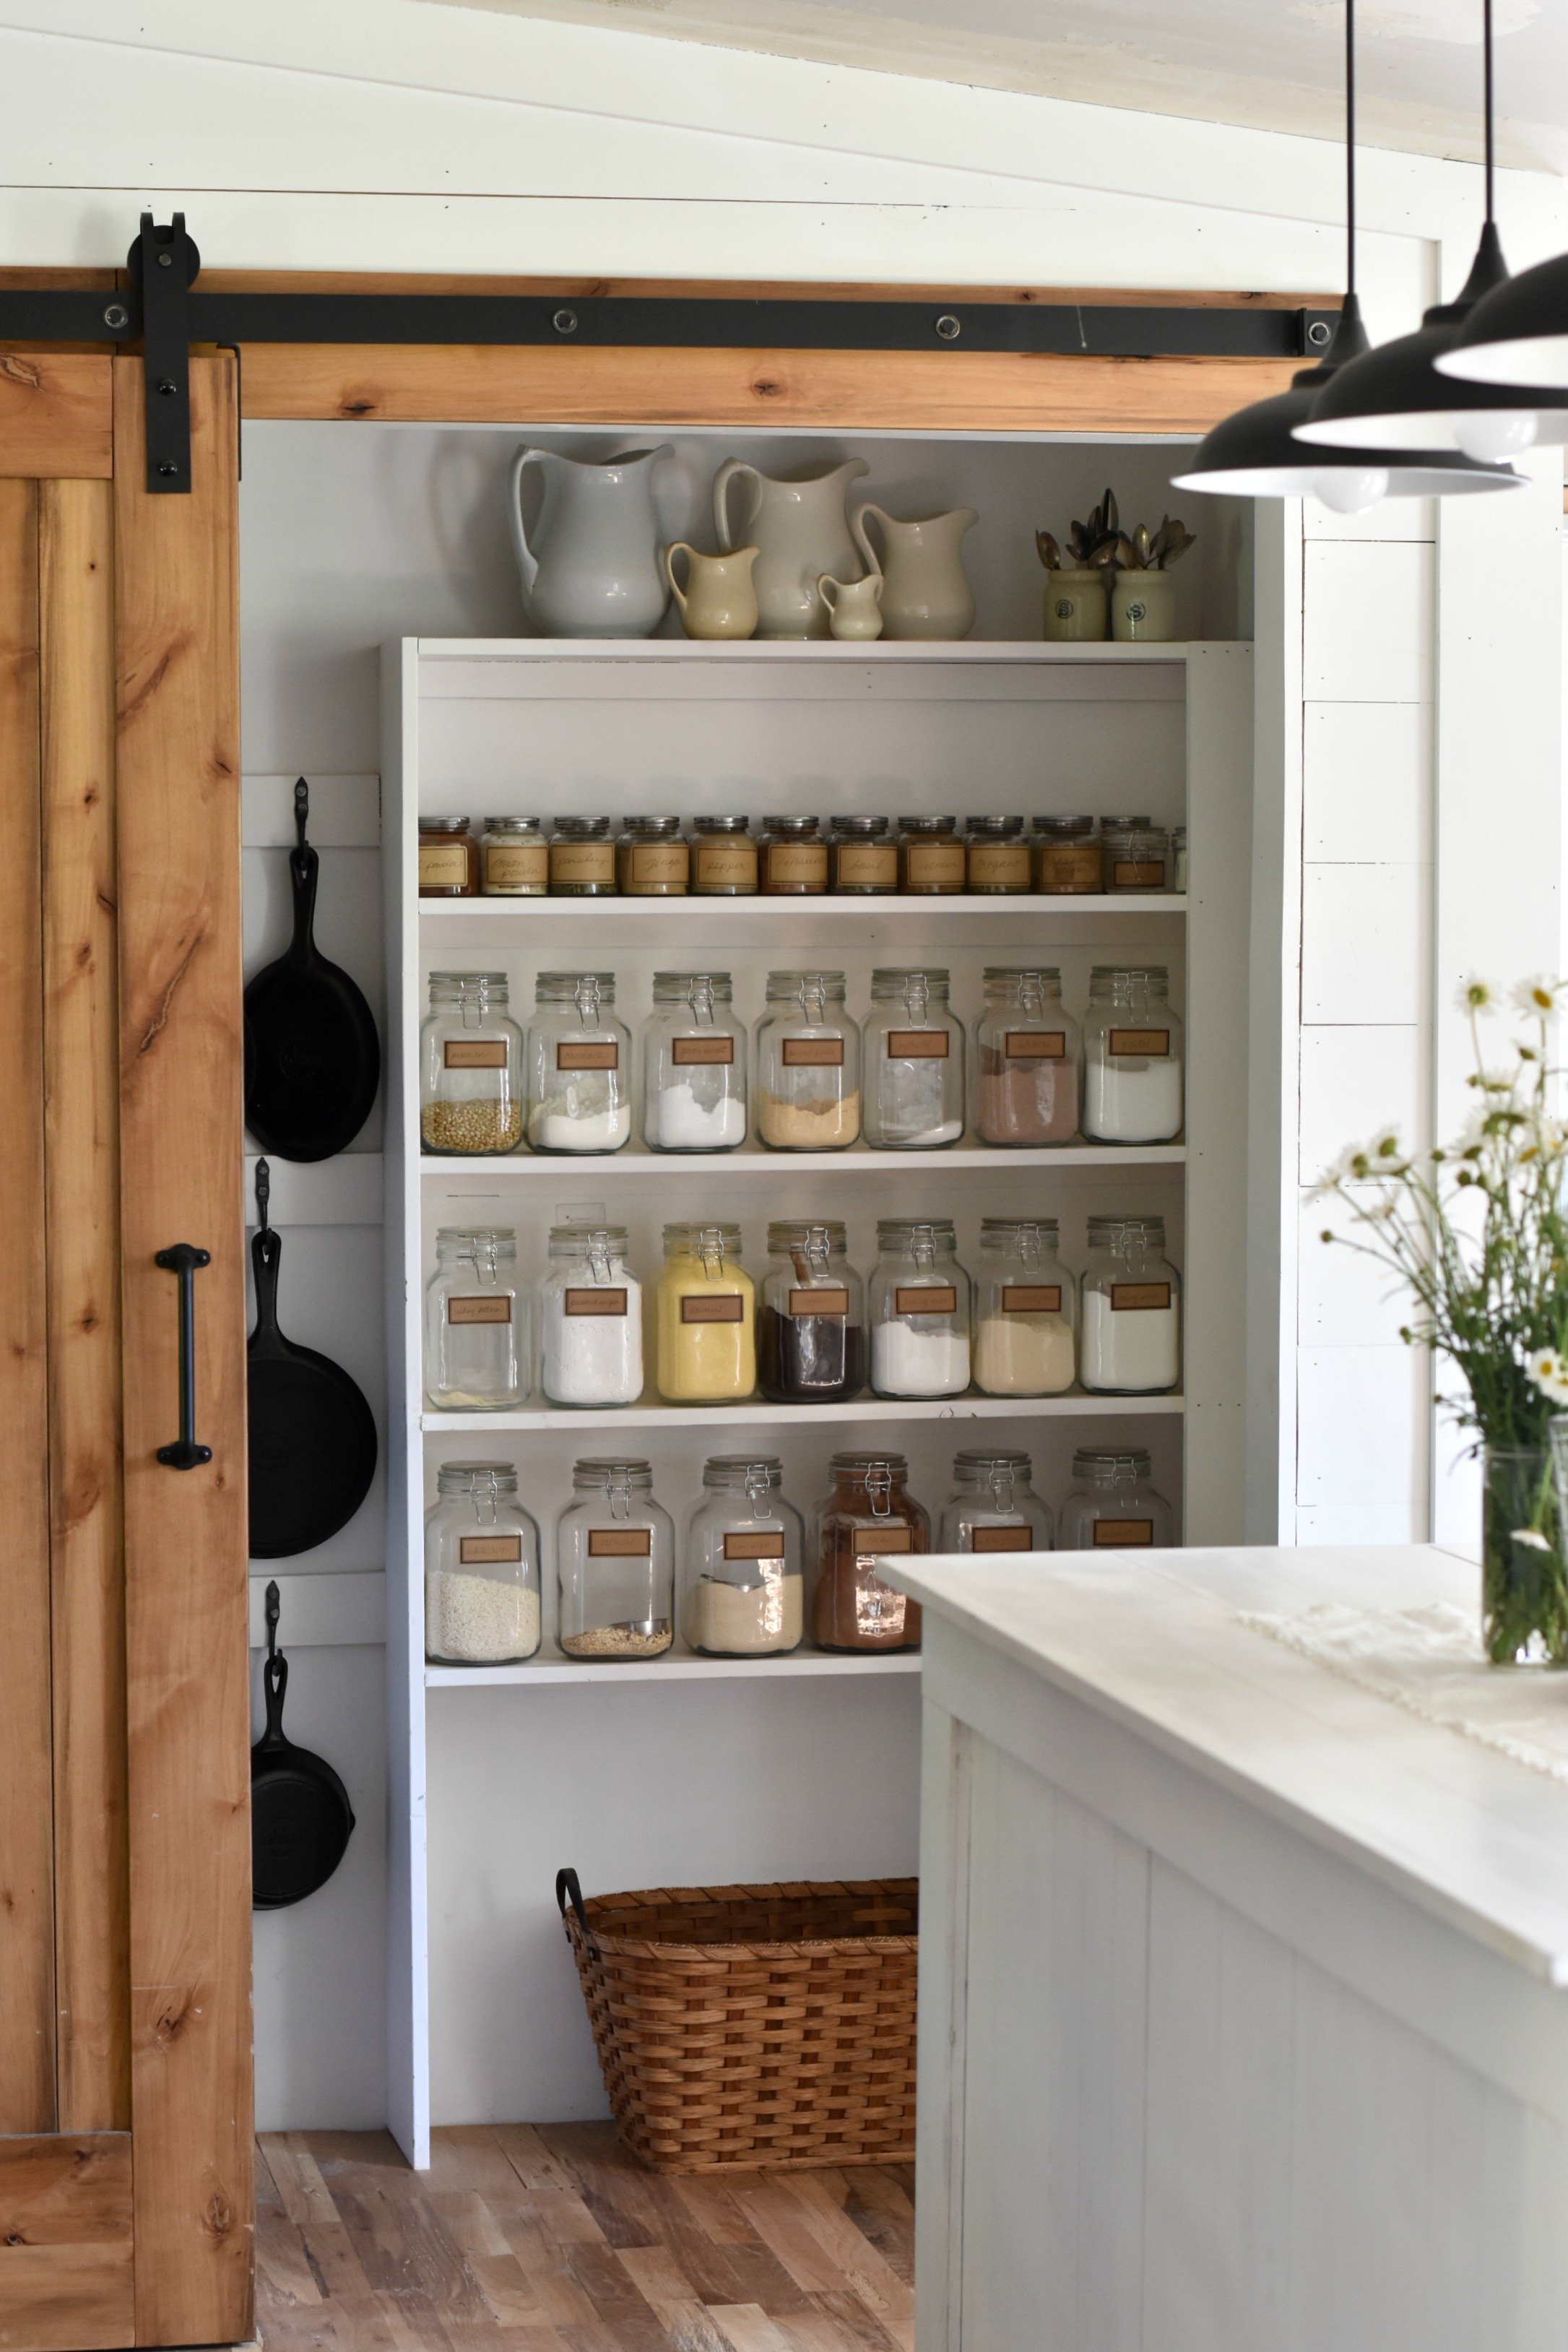 https://foxhollowcottage.com/wp-content/uploads/2020/03/20-Real-Life-DIY-Pantry-Makeovers-With-Tips-And-Ideas-at-Fox-Hollow-Cottage-blog-Walk-In-Kitchen-Storage-wit-Natural-Wood-Barn-Door.jpg